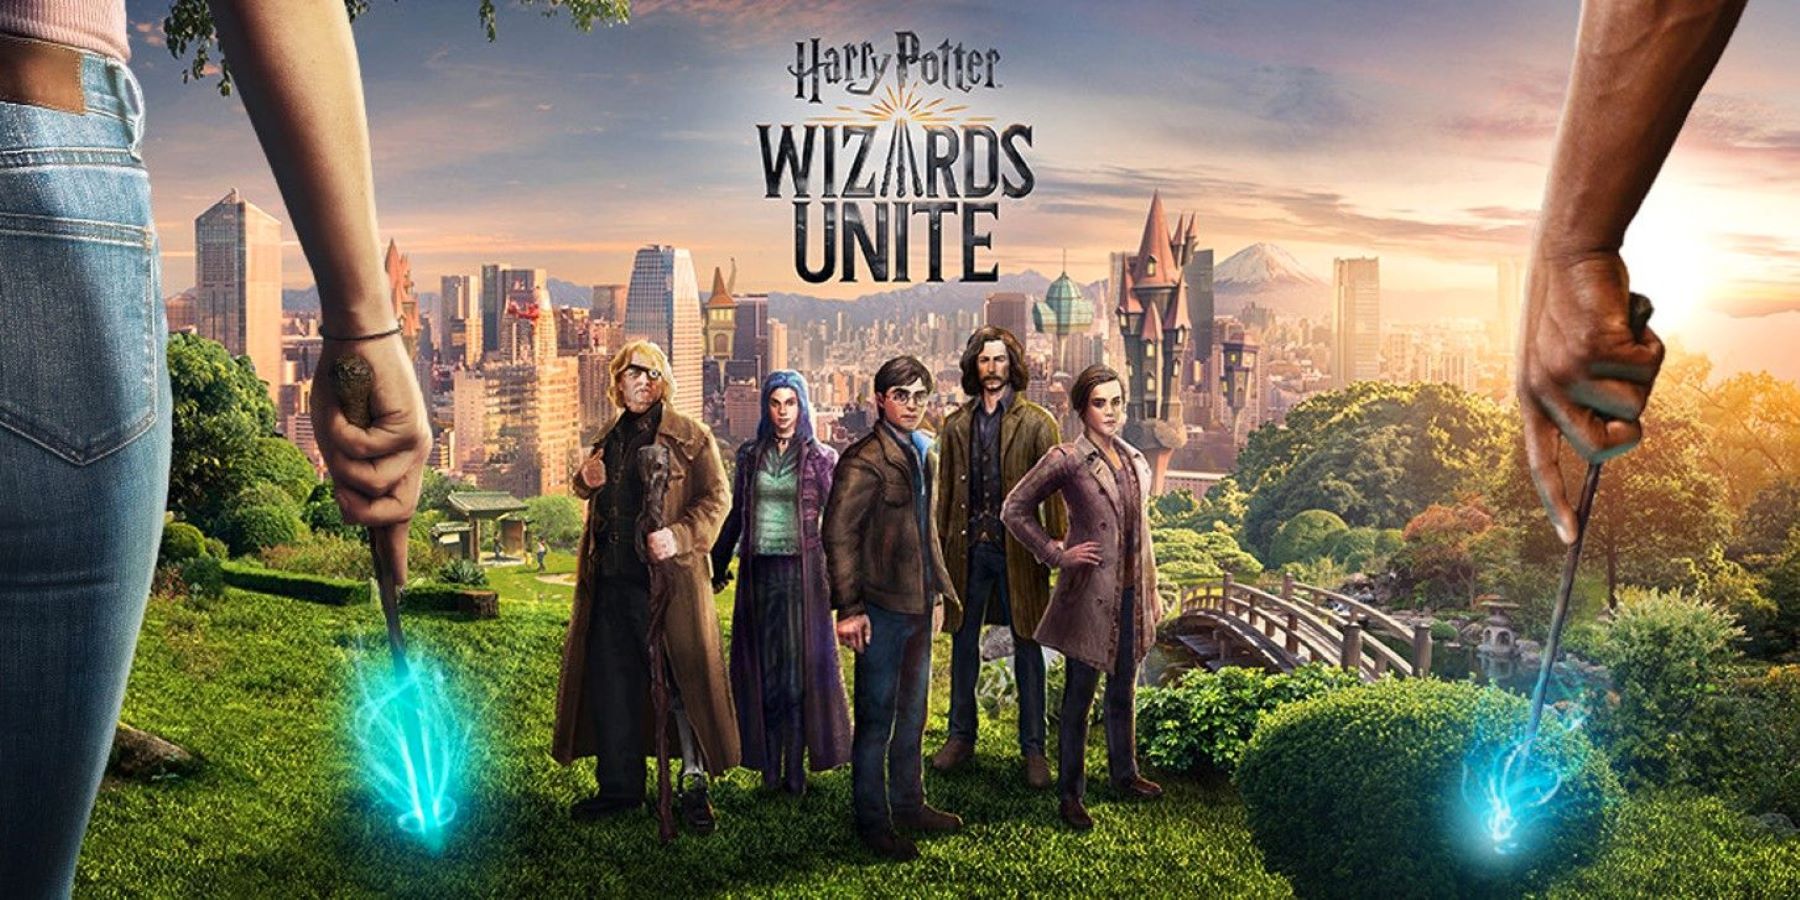 Harry Potter: Wizards Unite promo art showing two people with wands looking at Mad-Eye Moody, Nymphadora Tonks, Harry Potter, Sirius Black, and Hermione Granger standing in front of a city